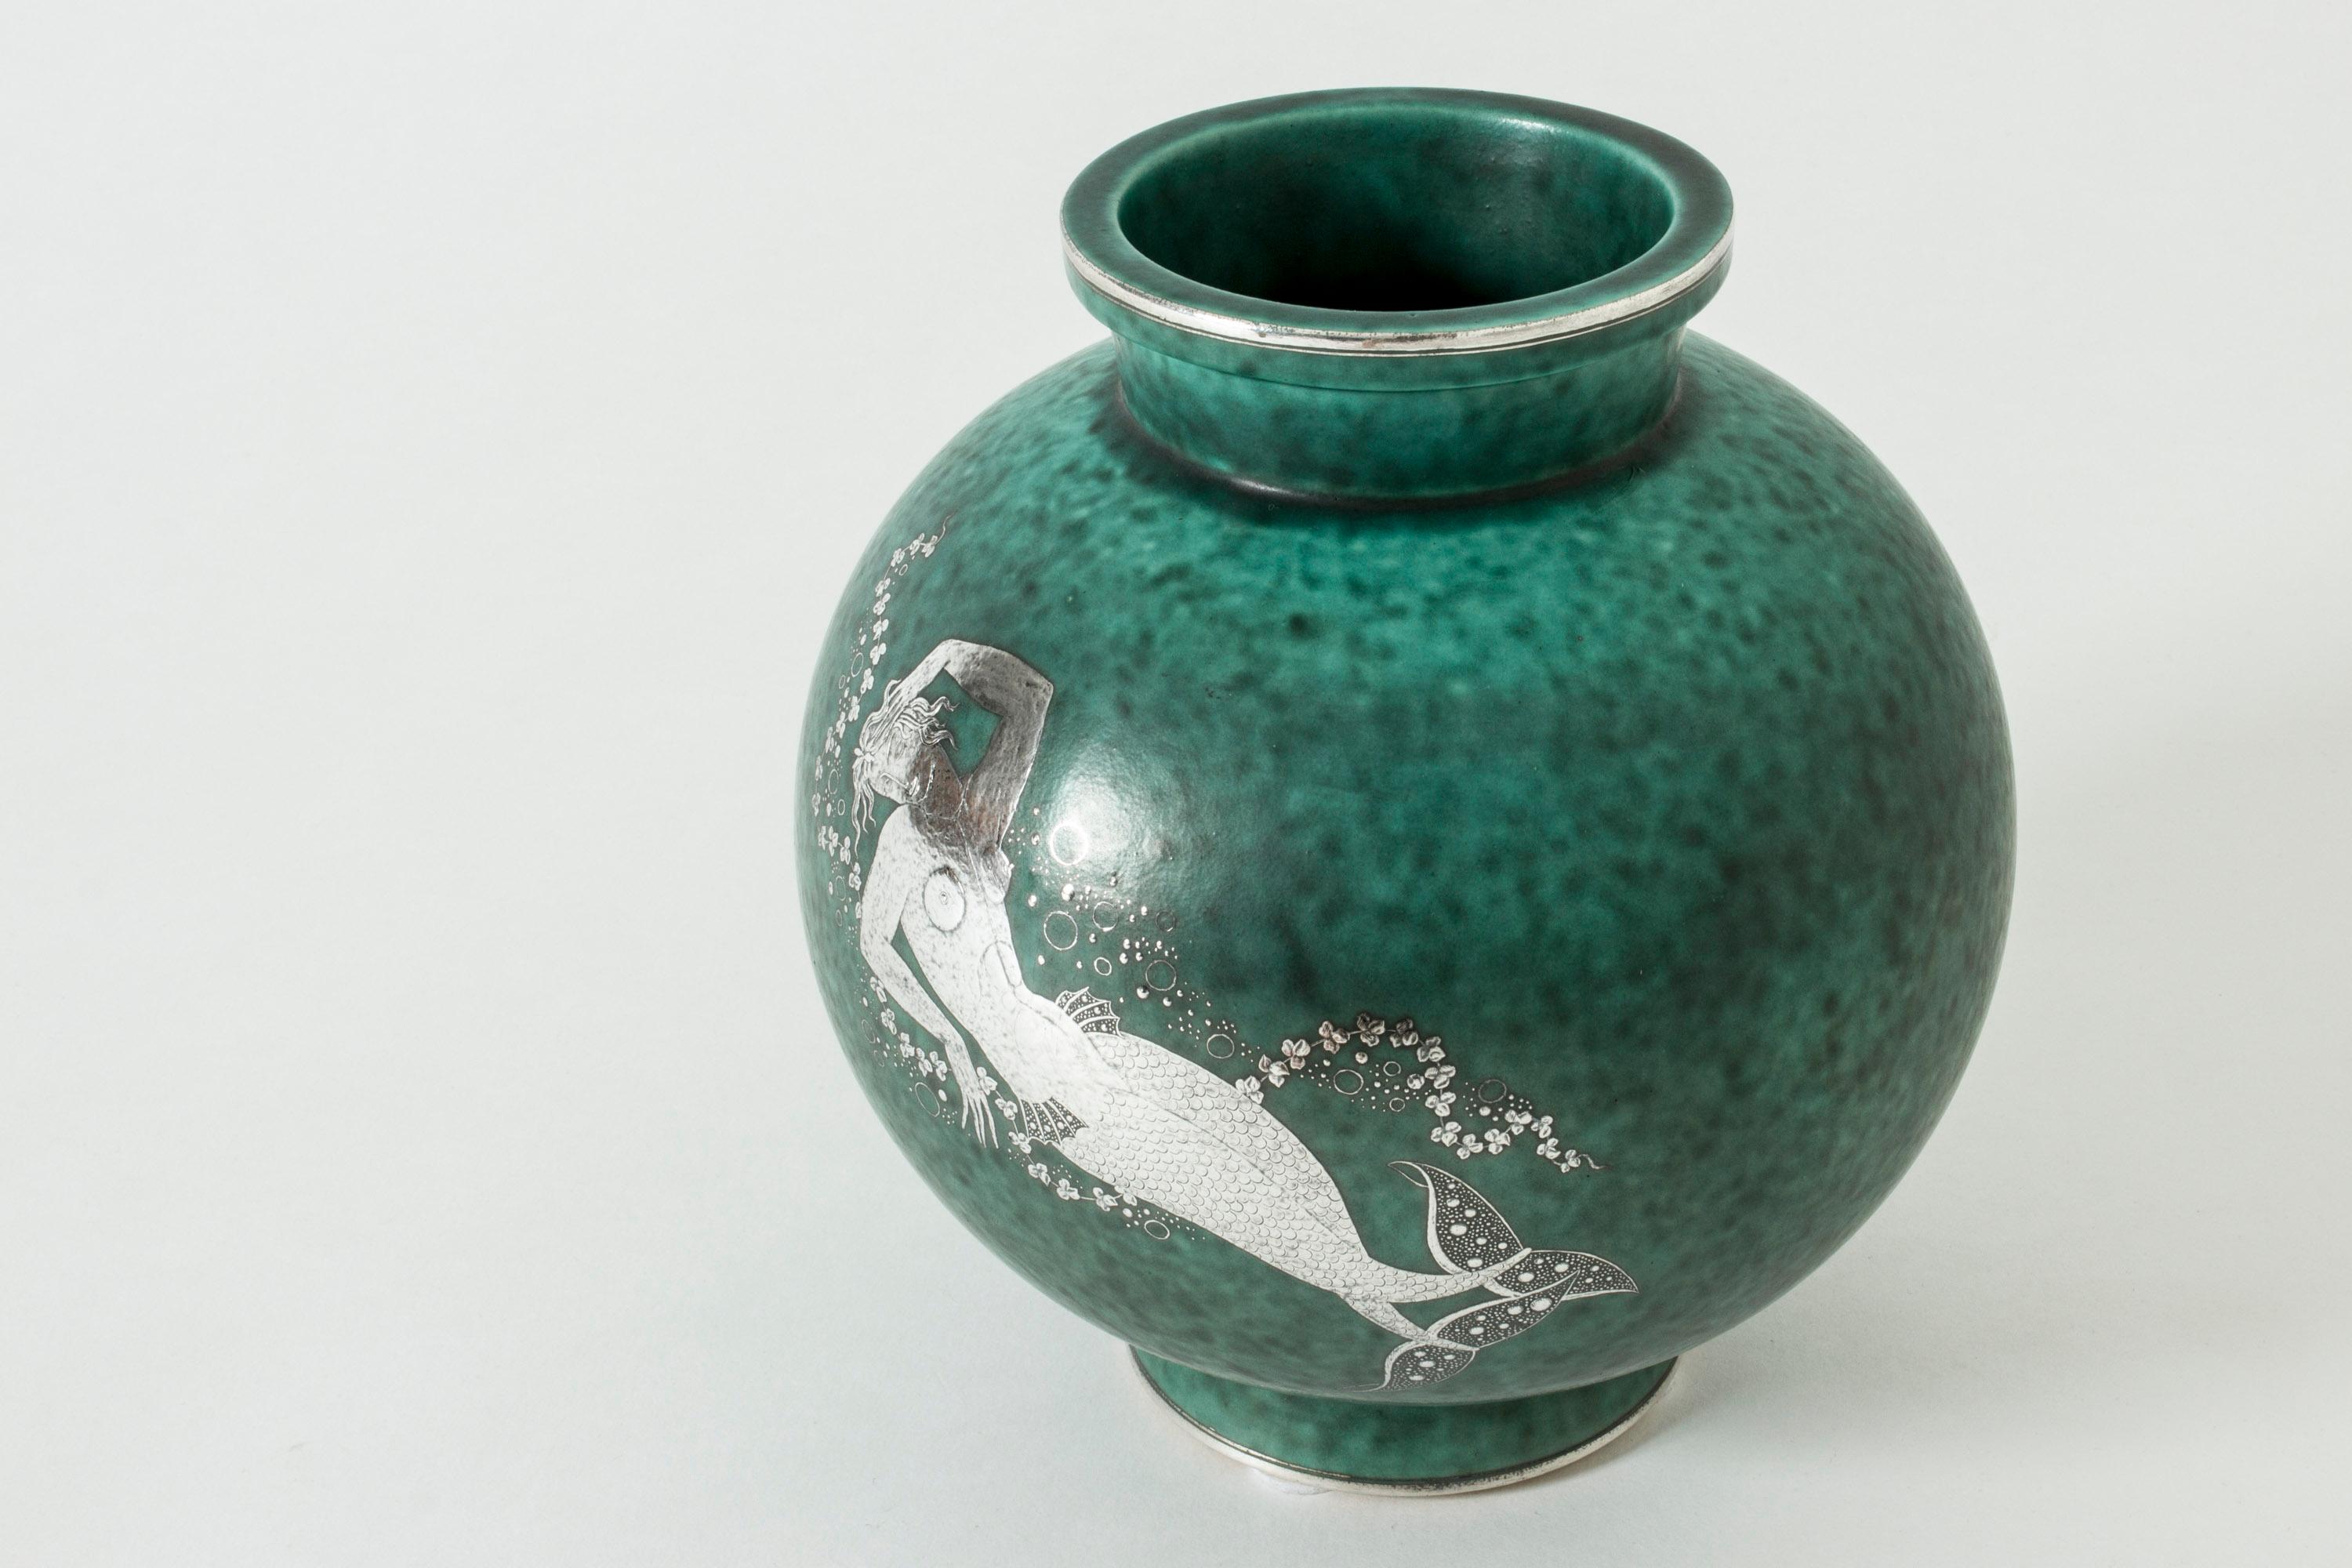 Stoneware “Argenta” vase by Wilhelm Kåge with silver decor of a mermaid. Lovely attention to every detail, exquisitely made tail fin and swooning expression in her face.

“Argenta” was introduced at the Stockholm exhibition in 1930 and became